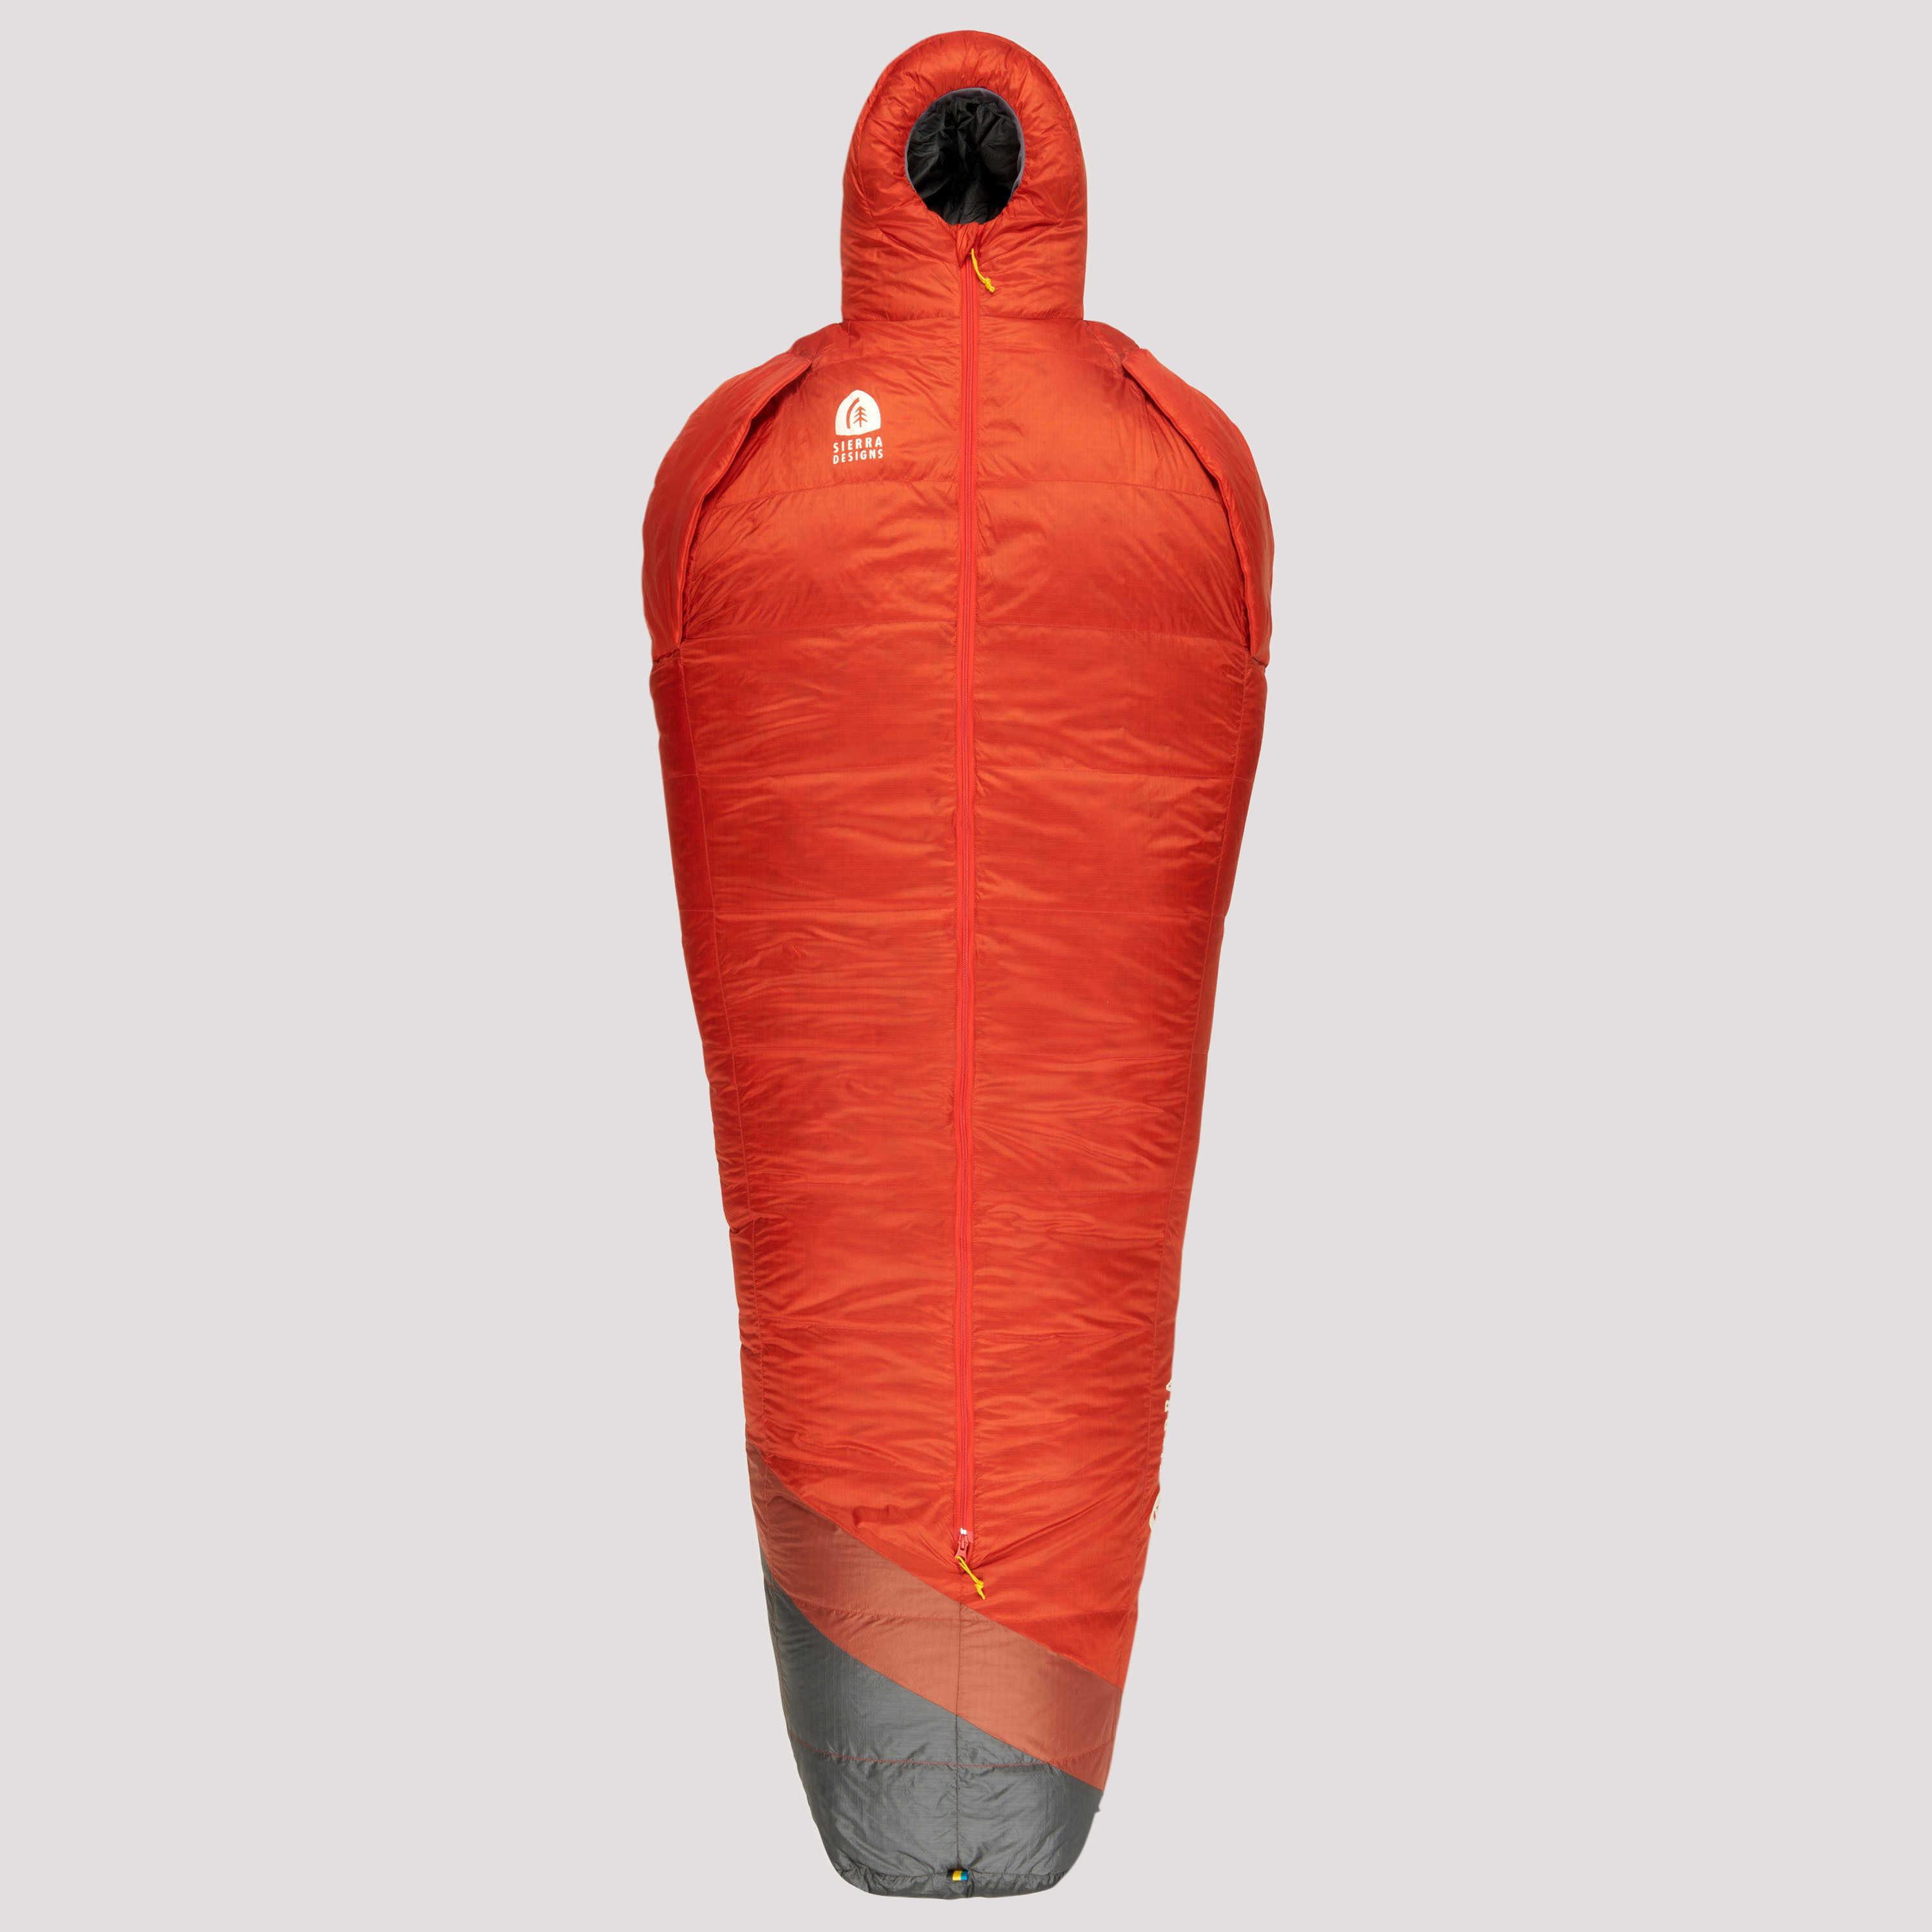 9 Best Kids' Sleeping Bags for Camping of 2023 - Reviewed